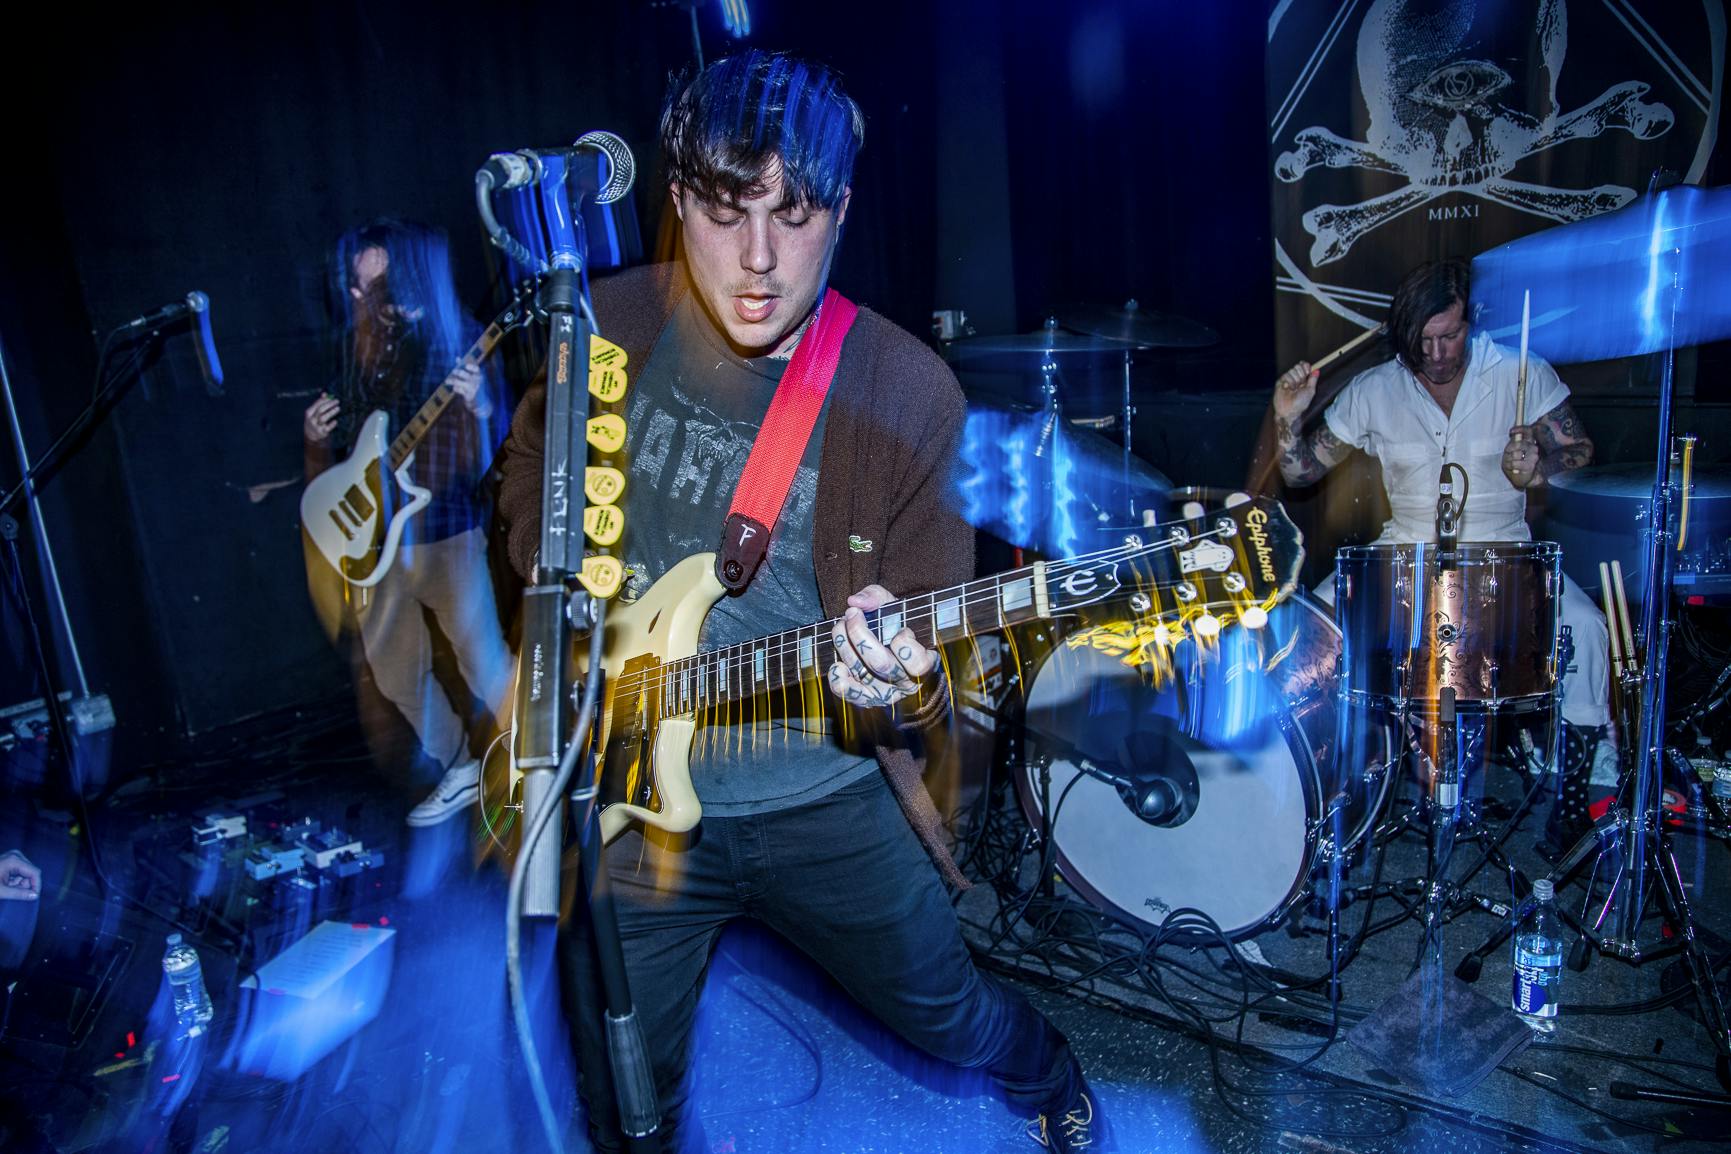 Frank Iero Cancels Shows Due To Laryngitis And "A Brutal Sinus Infection"